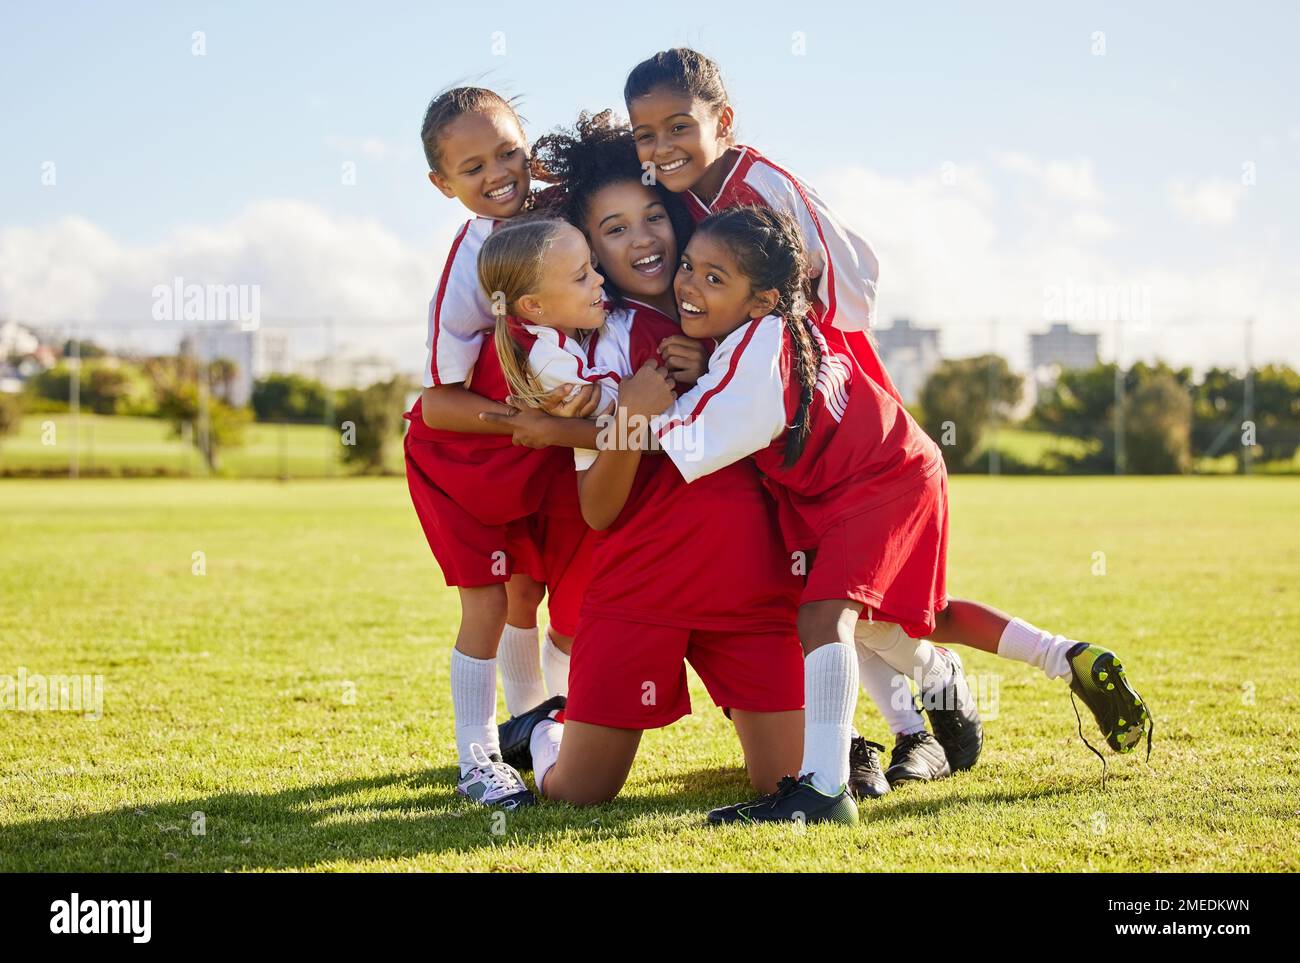 Soccer children, winner or happy for success, goal or wellness in match, game or fitness with smile on football field. Motivation, sport or kids Stock Photo